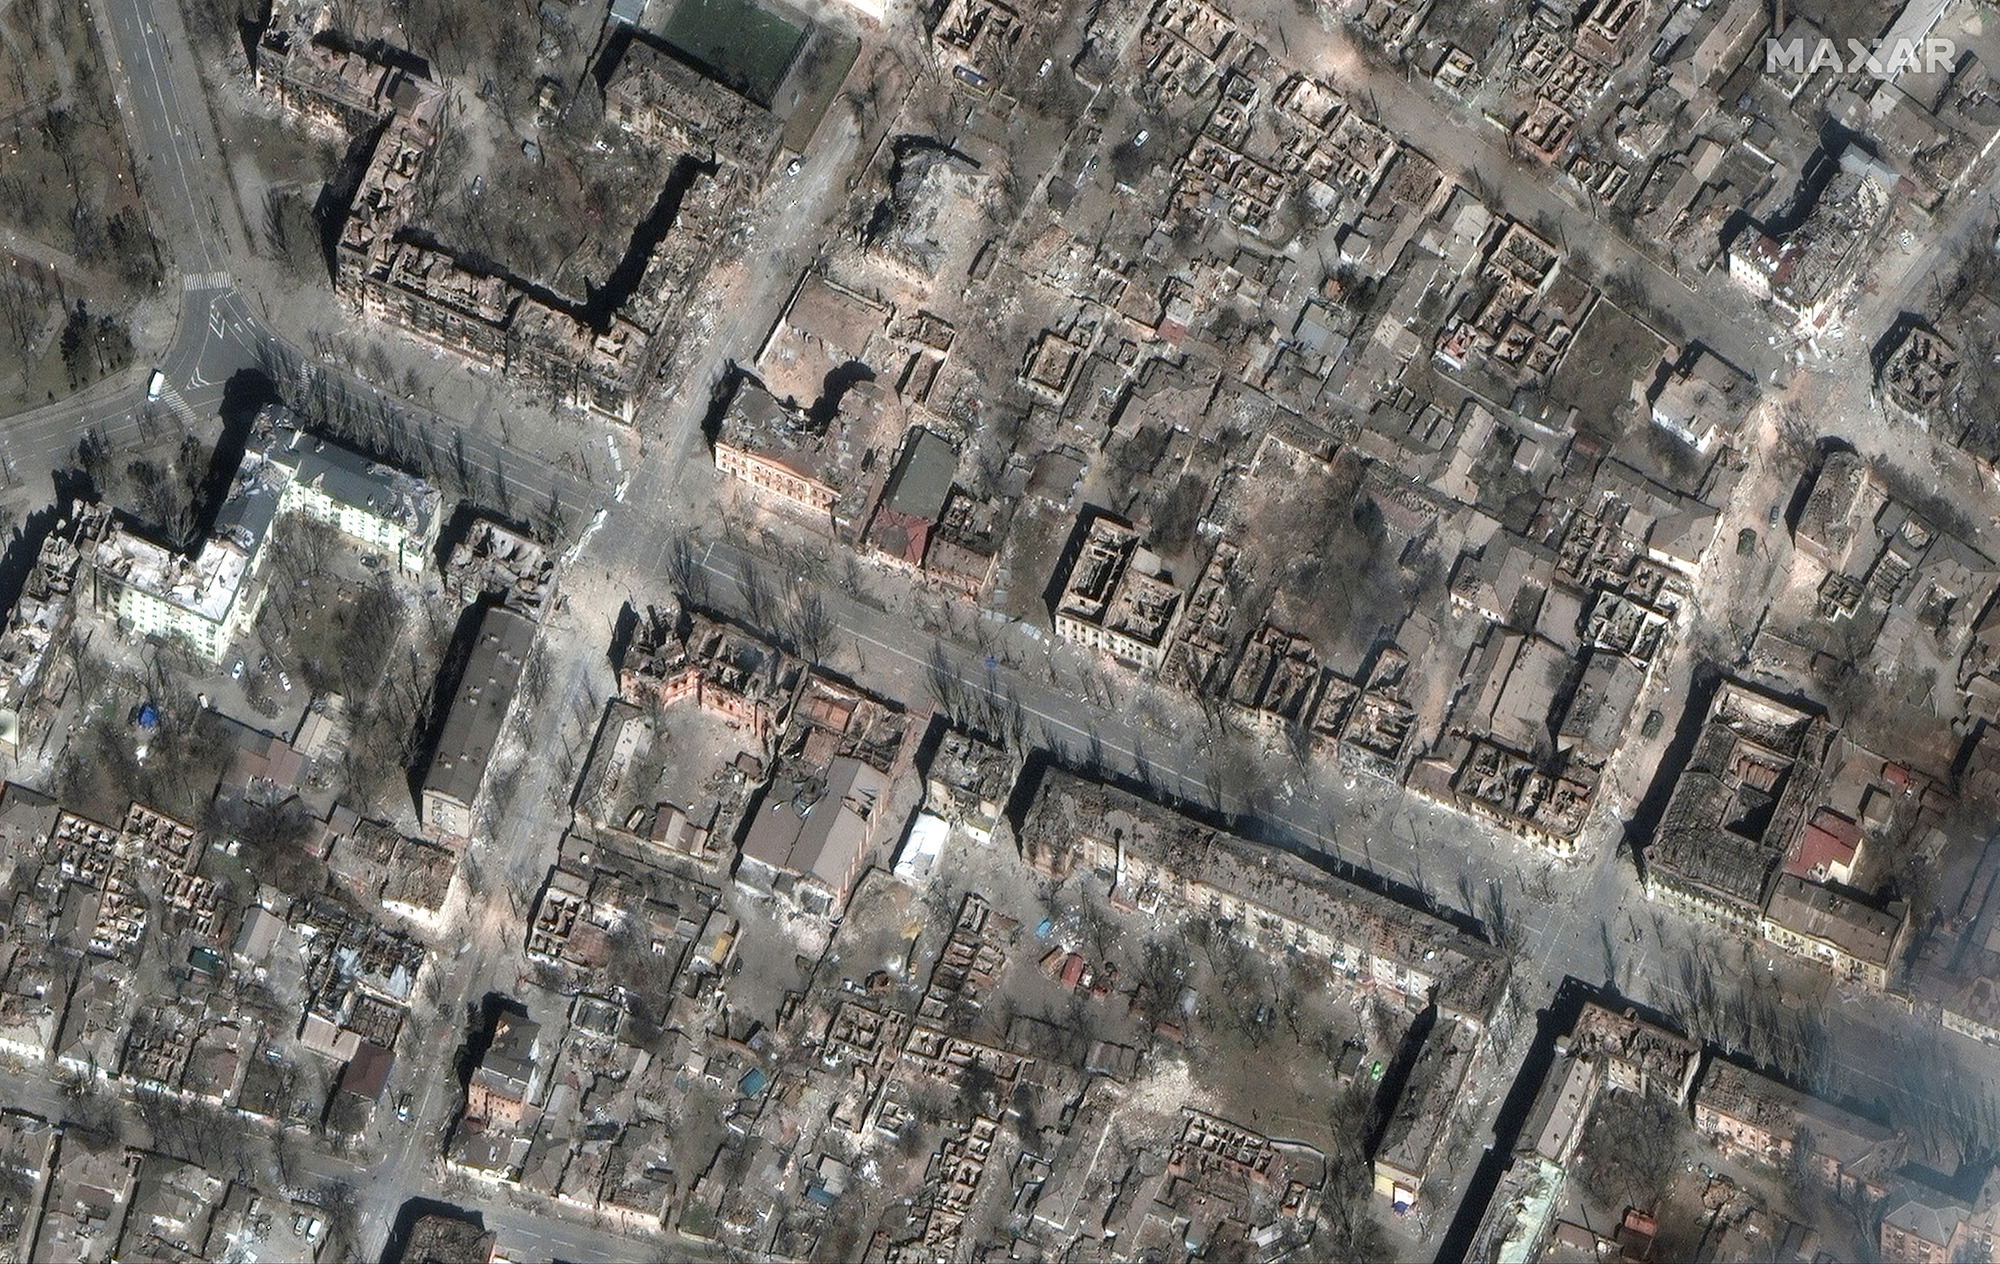 Satellite image showing destruction of homes and buildings in Mariupol, Ukraine, on March 29.